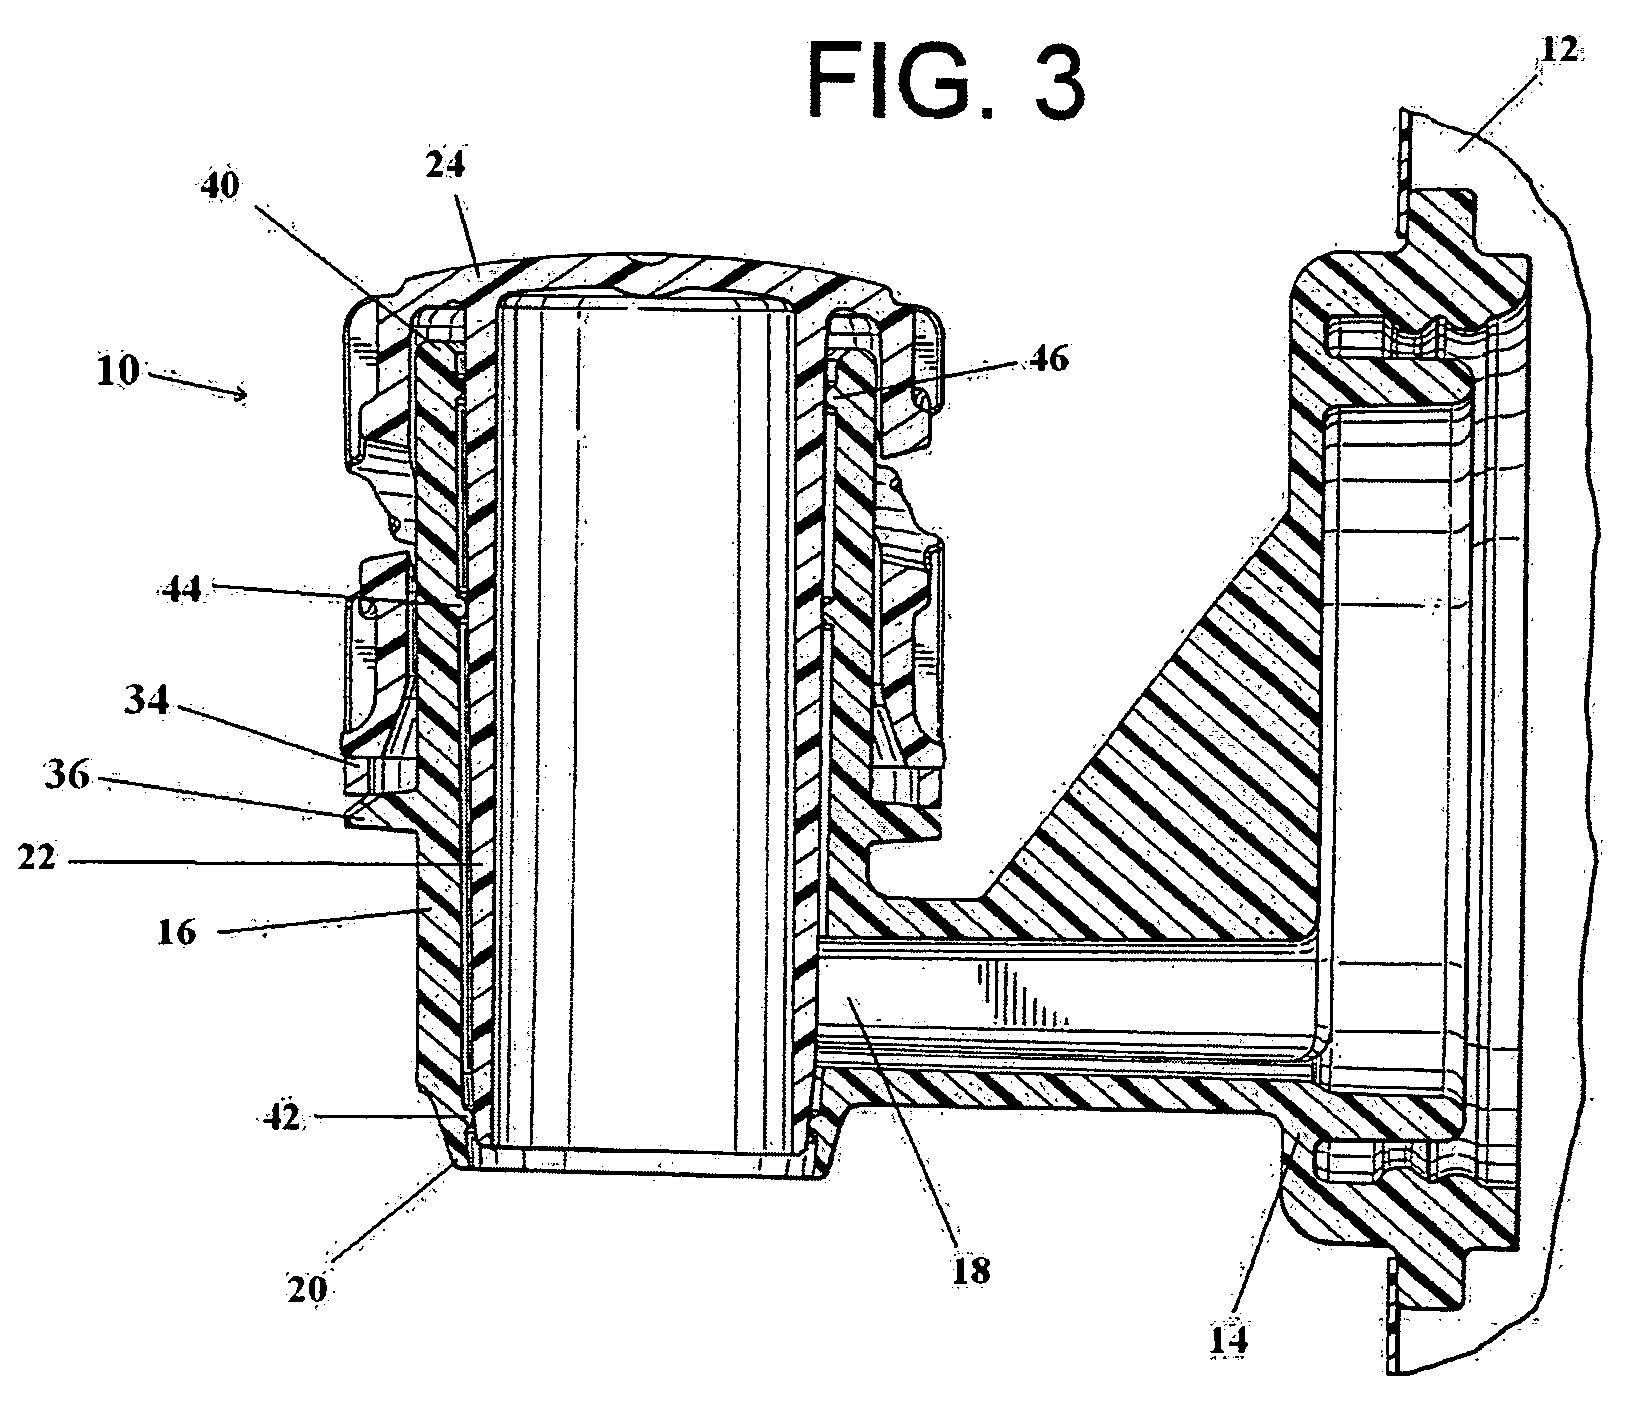 Valve for controlling the flow of fluids